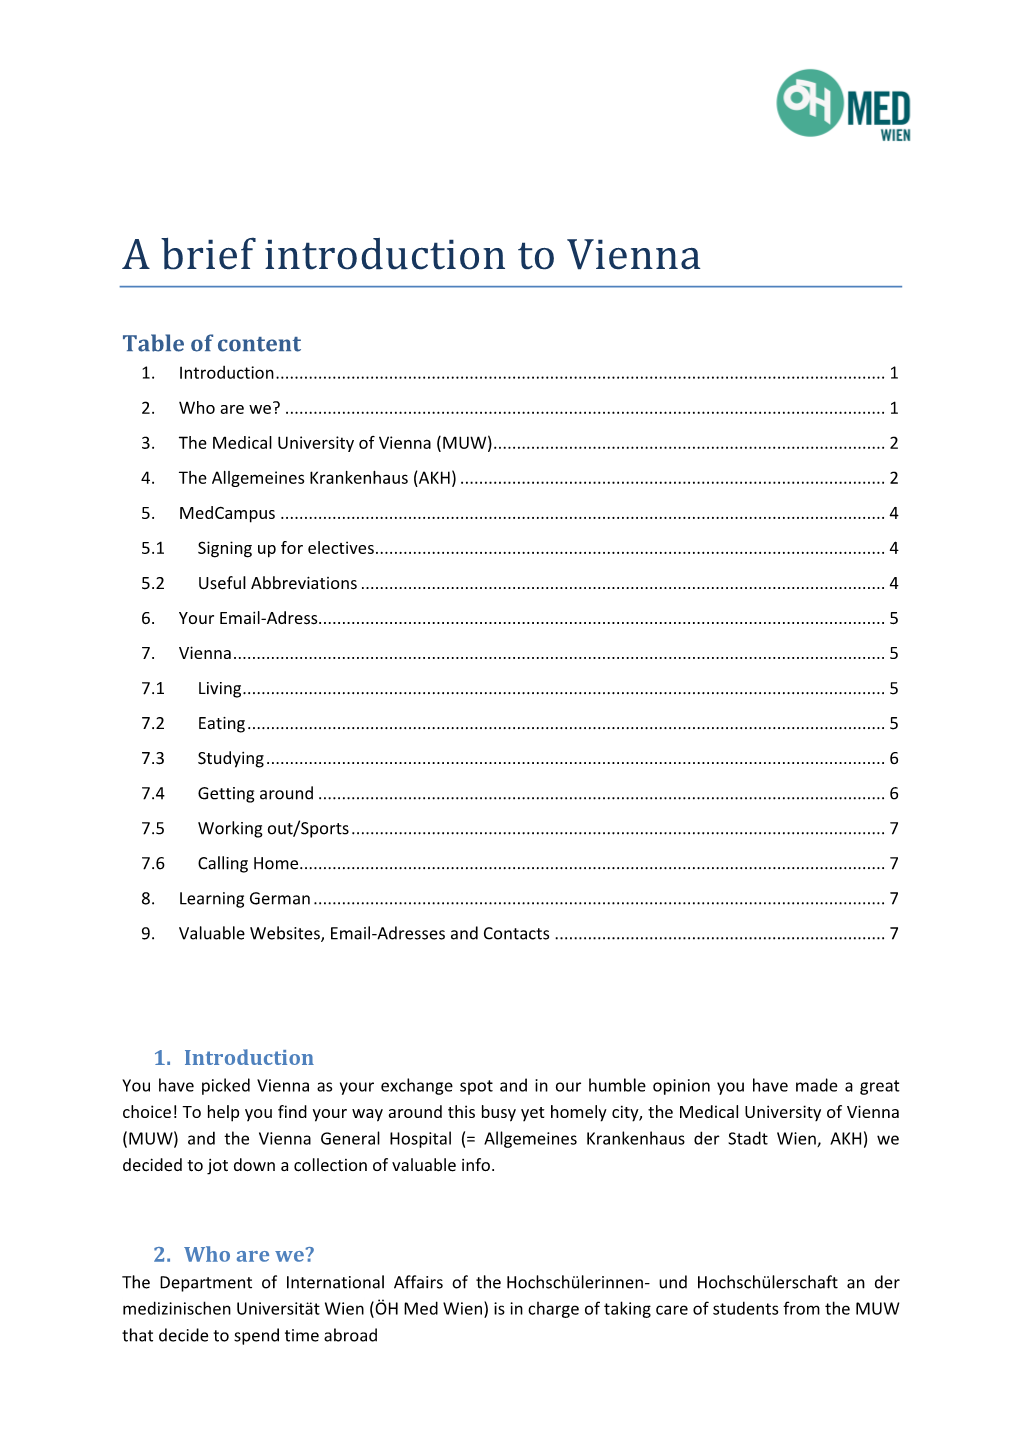 A Brief Introduction to Vienna